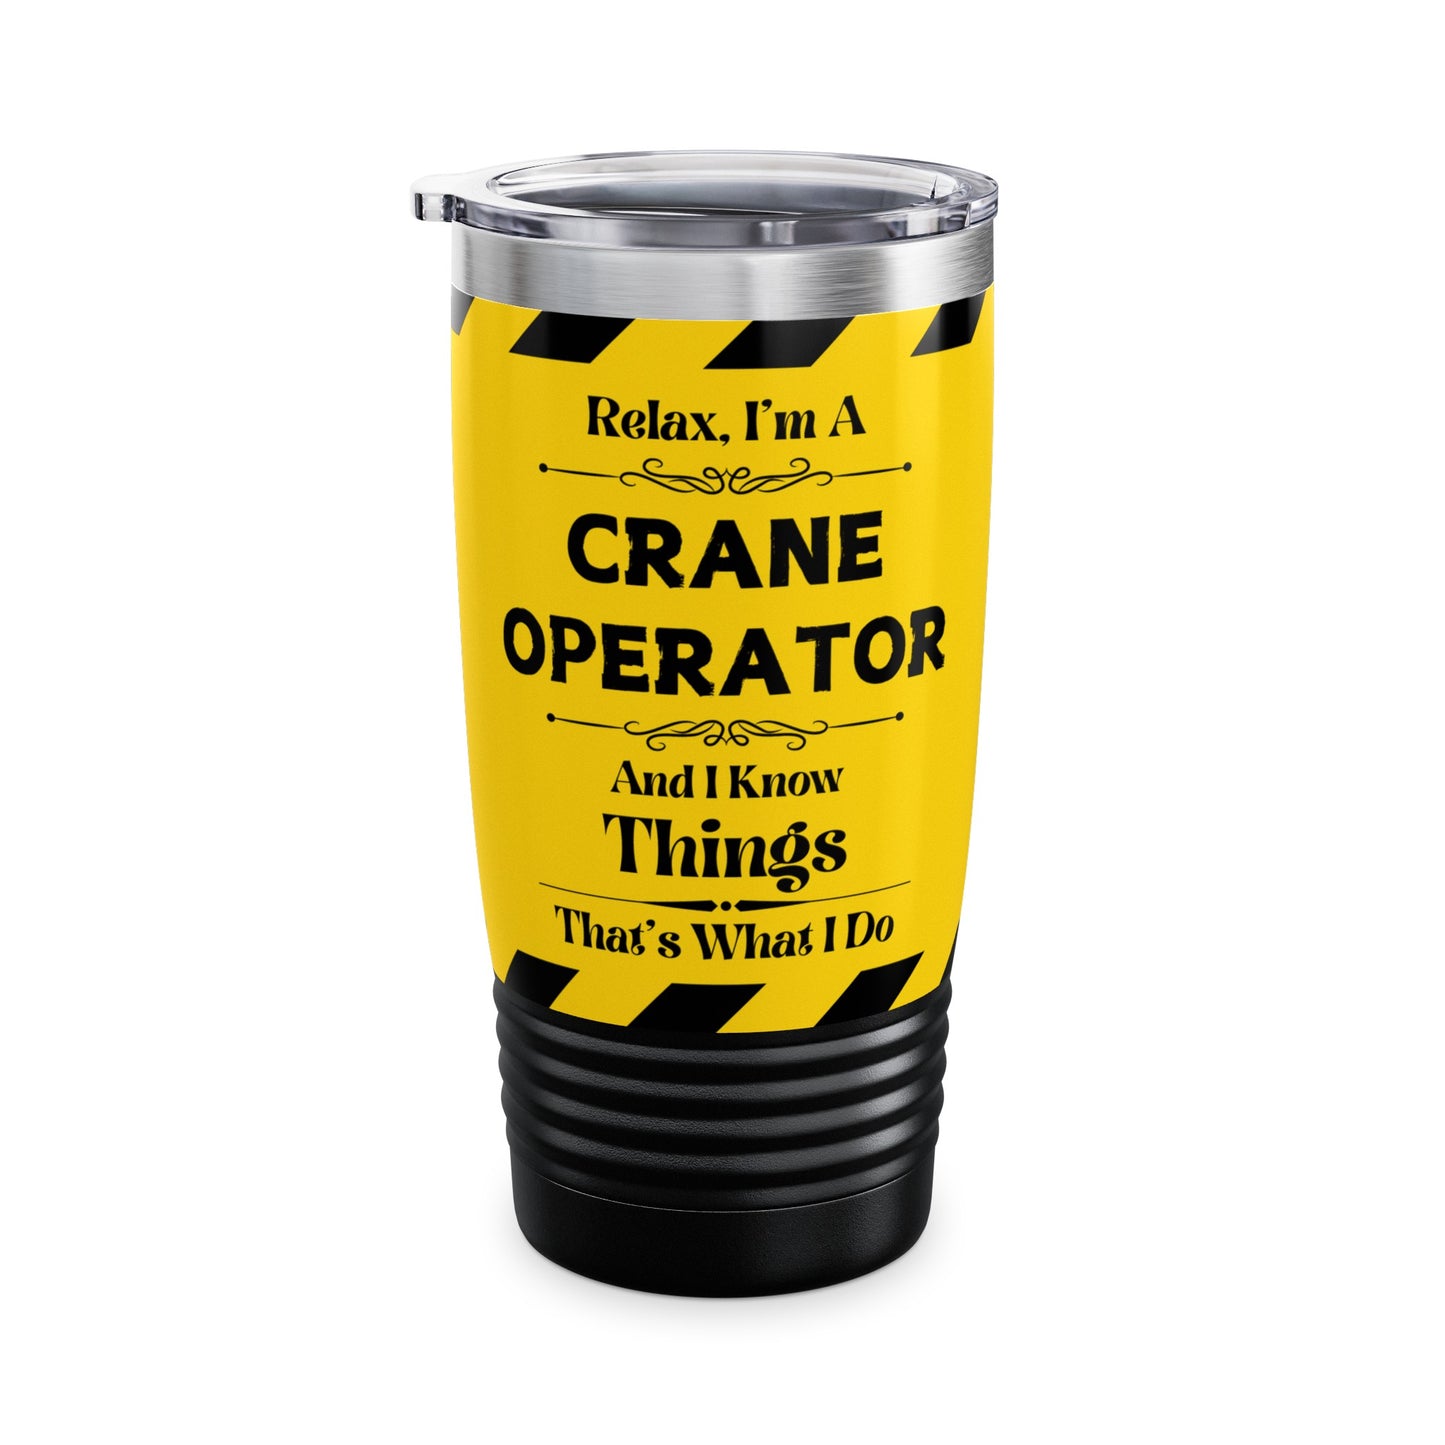 Relax, I'm A Crane Operator, And I Know Things - Ringneck Tumbler, 20oz